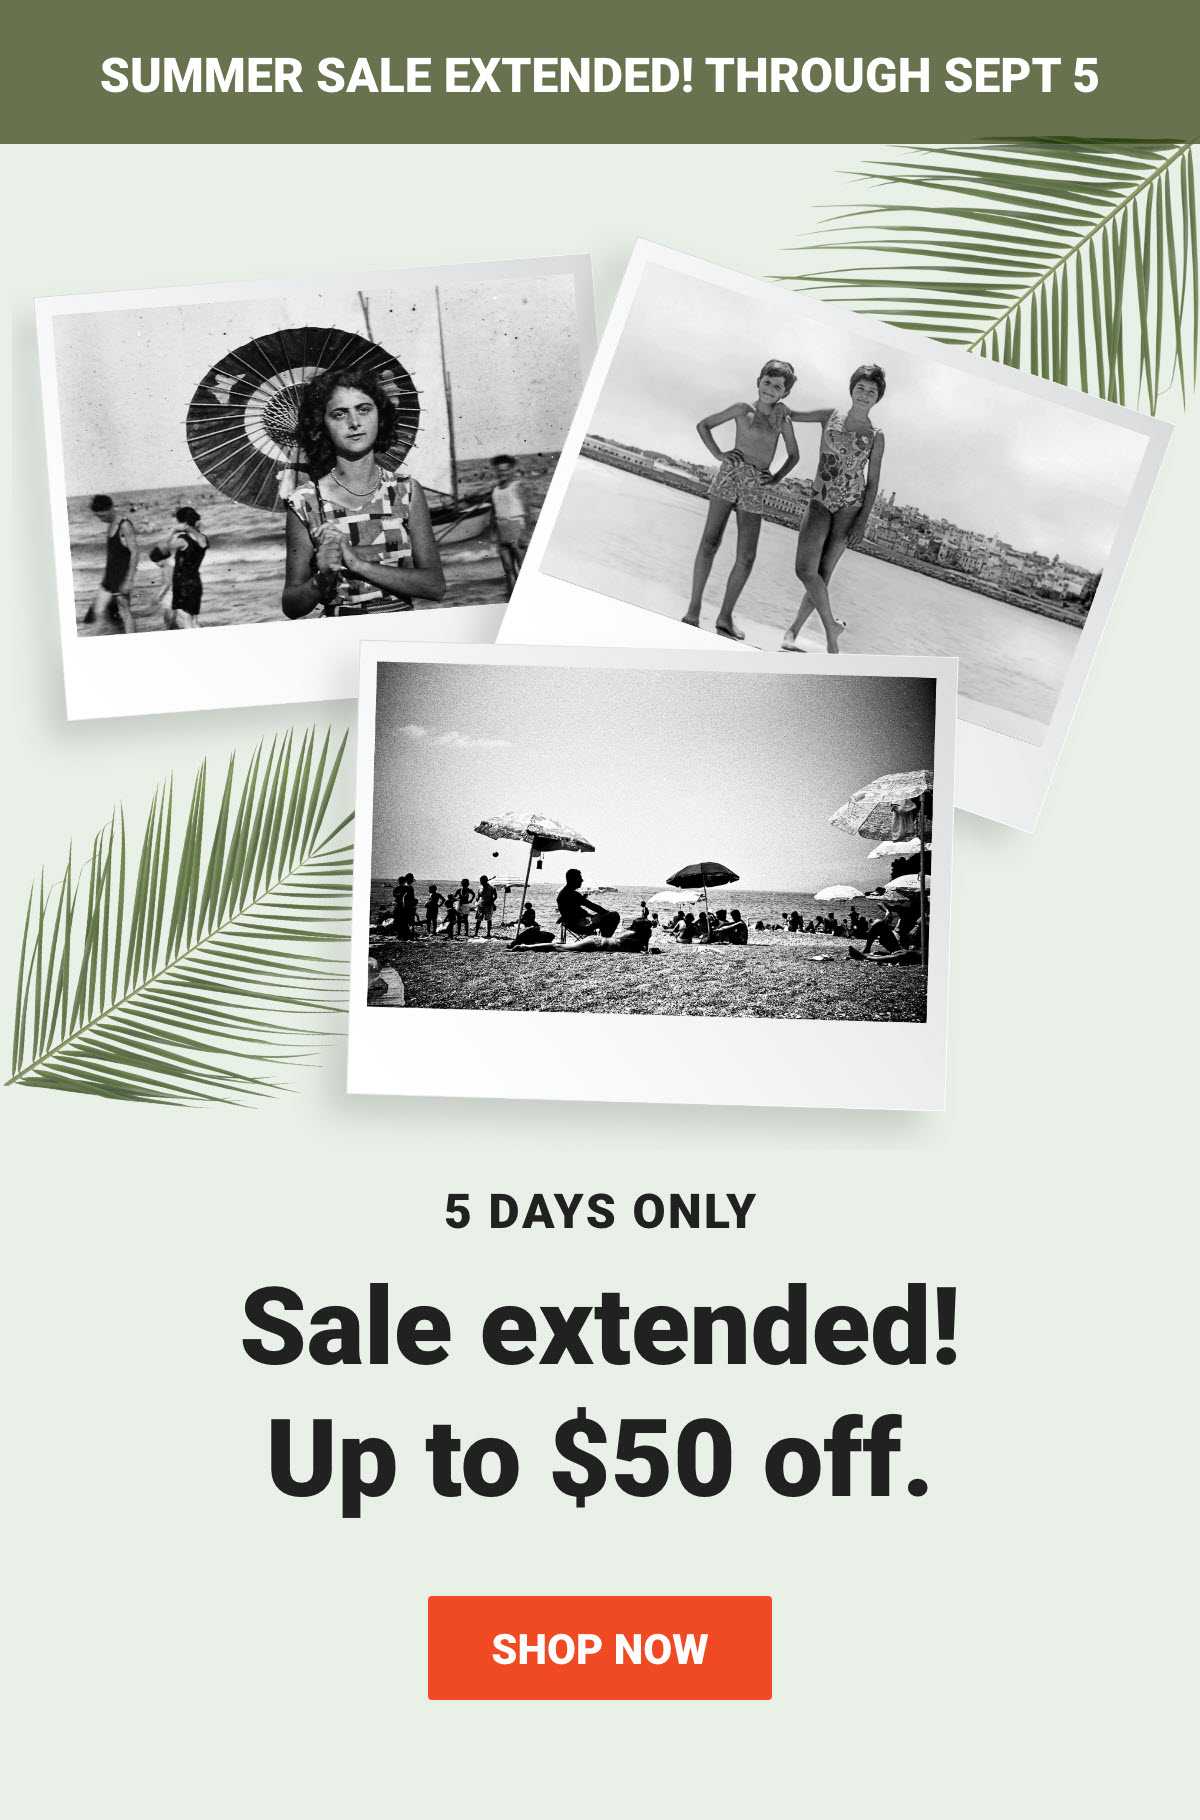 EXTENDED FamilyTreeDNA Summer Sale: Save up to $50 USD on a variety of DNA test kits!